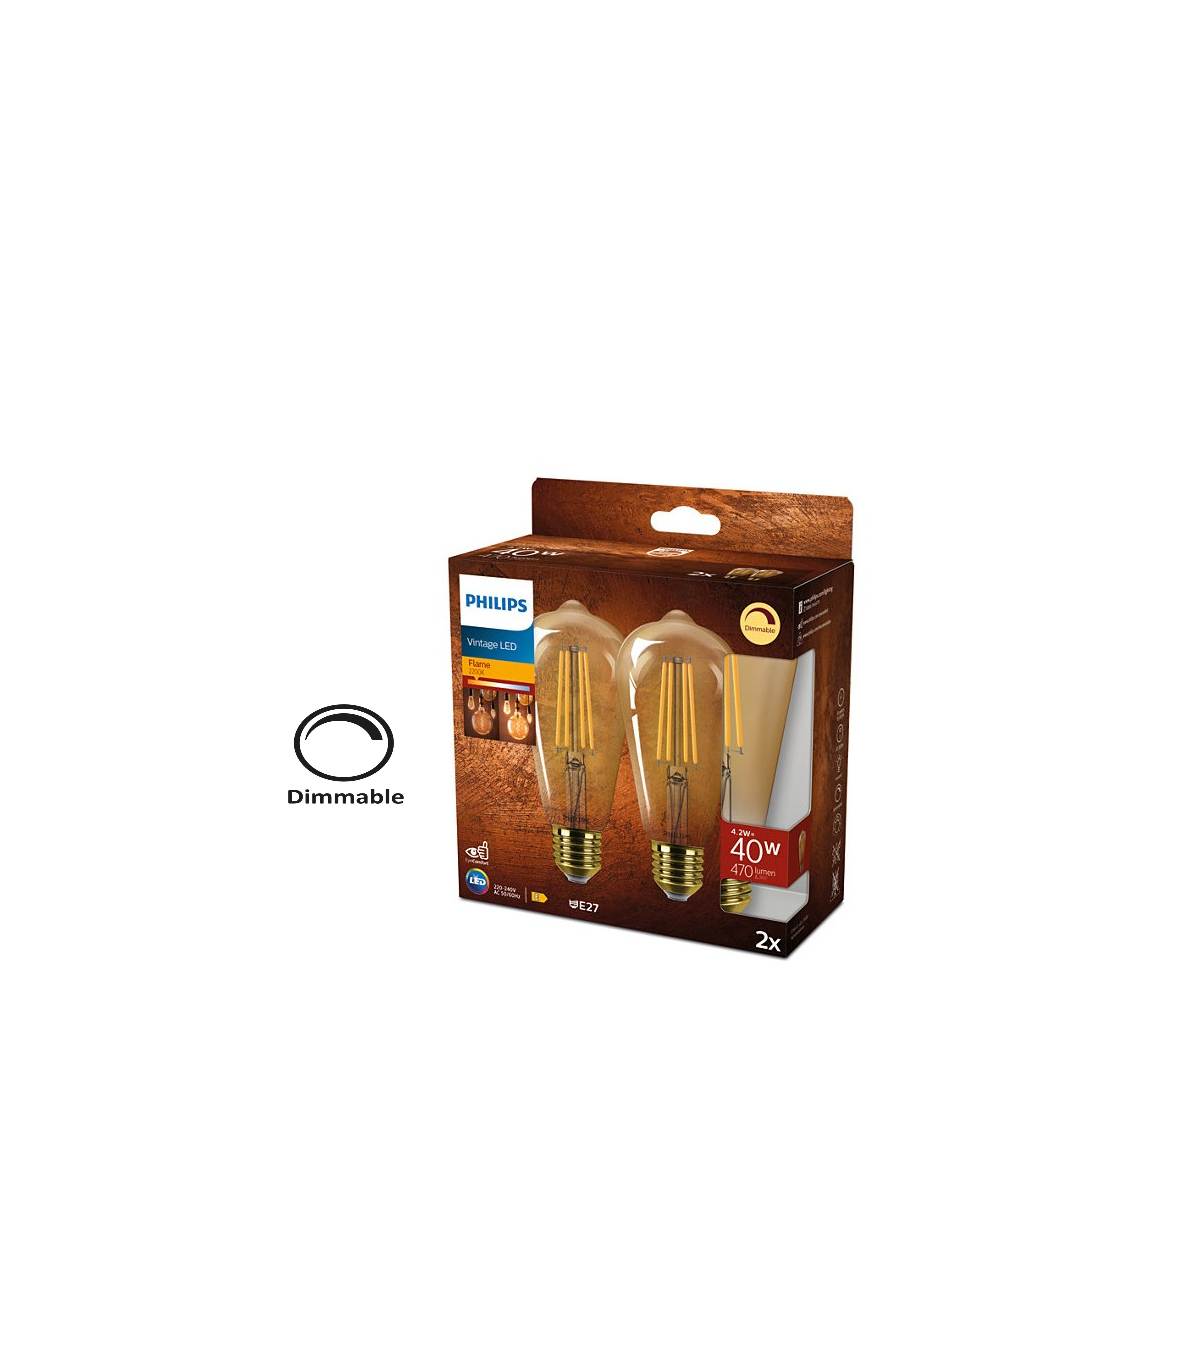 https://www.kfms.fr/8348-superlarge_default/2-ampoules-led-philips-led-classic-42w-substitut-40w-st64-e27-gold-dimmable.jpg